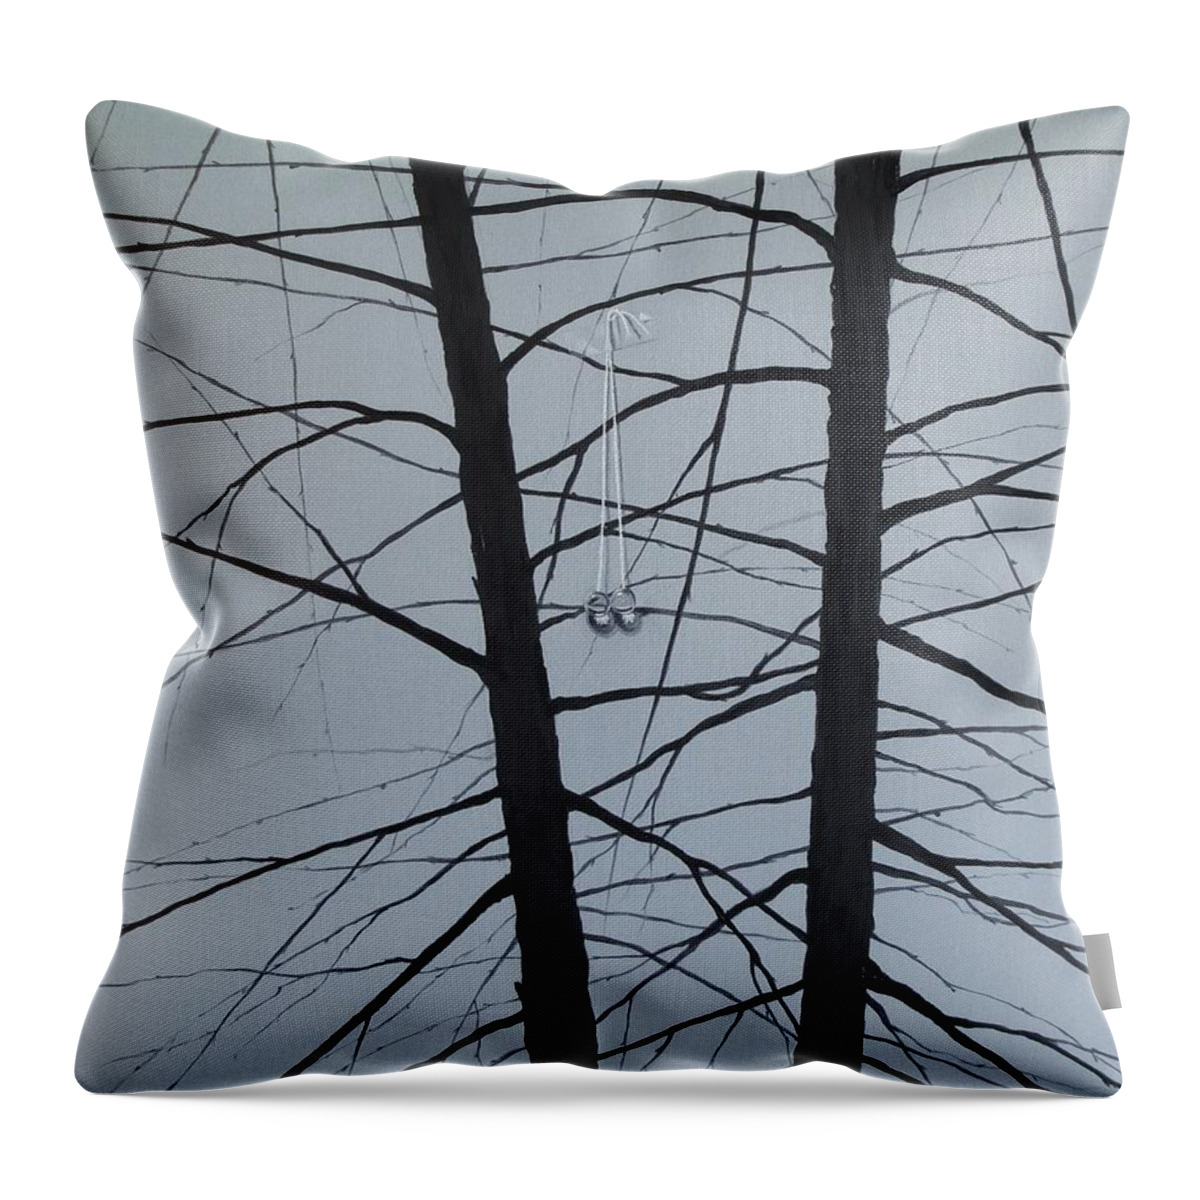  Throw Pillow featuring the painting Unity by Roger Calle